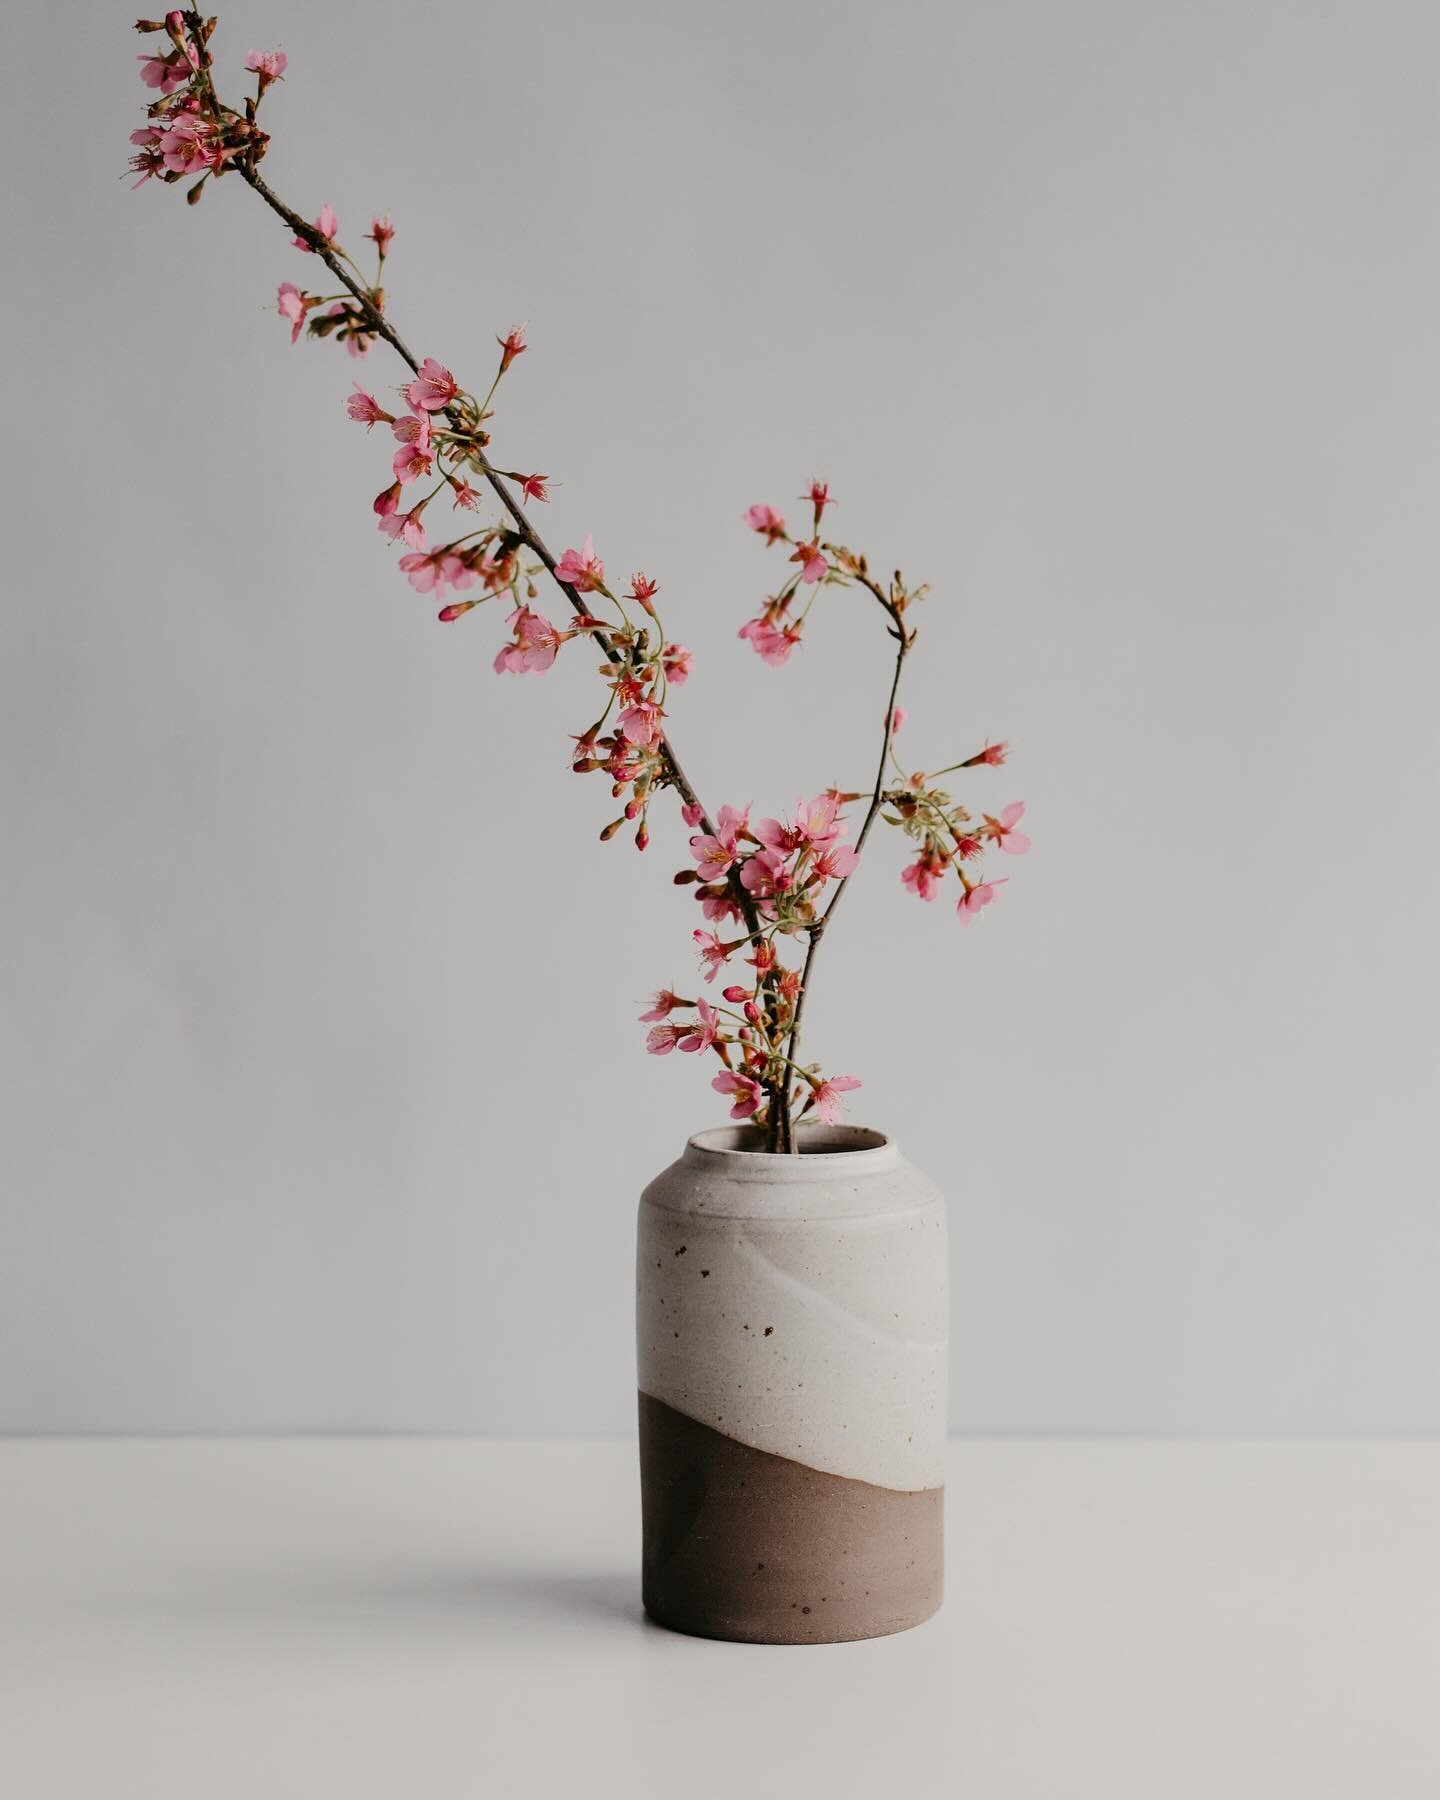 Spring is here&hellip; Hope you are able to catch some rays of sun, wherever you are. 

Seen here: a cherry blossom branch in a vase made of all clay recycled scraps: red, speckled, grey and black stoneware. The piece is then half dipped in matte whi